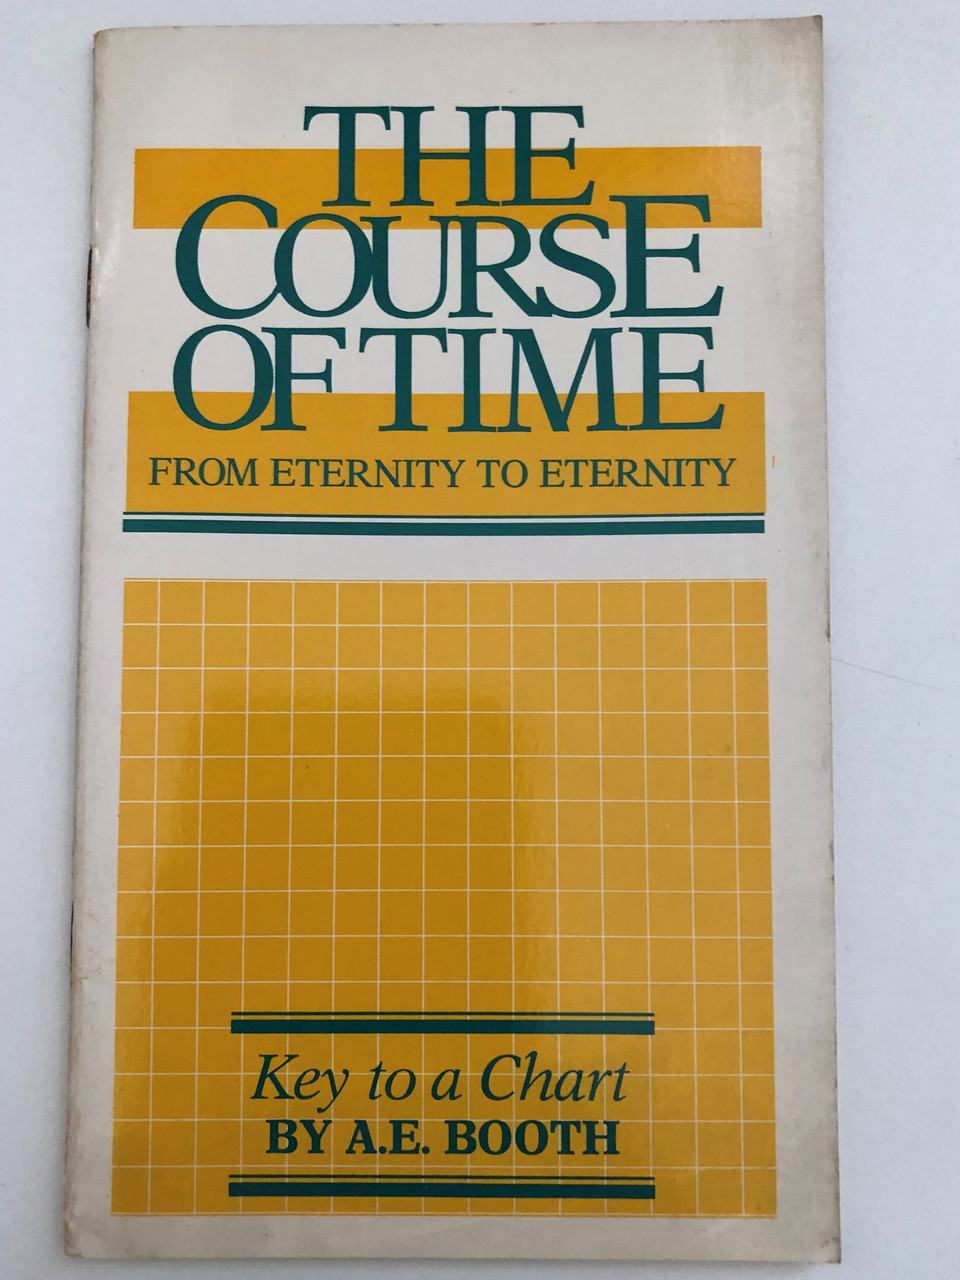 https://cdn10.bigcommerce.com/s-62bdpkt7pb/products/53517/images/271473/The_Course_of_Time_from_Eternity_to_Eternity_Key_to_a_Chart_by_A.E._BOOTH_Loizeaux_Brothers_Incorporated_Printed_in_the_United_States_of_America_872130739__56680.1680195383.1280.1280.JPG?c=2&_gl=1*91yxsi*_ga*MzA5MjcwMDY5LjE2Nzk3NDk1MDE.*_ga_WS2VZYPC6G*MTY4MDE3NjQ4NS41LjEuMTY4MDE5NTQwOS42MC4wLjA.